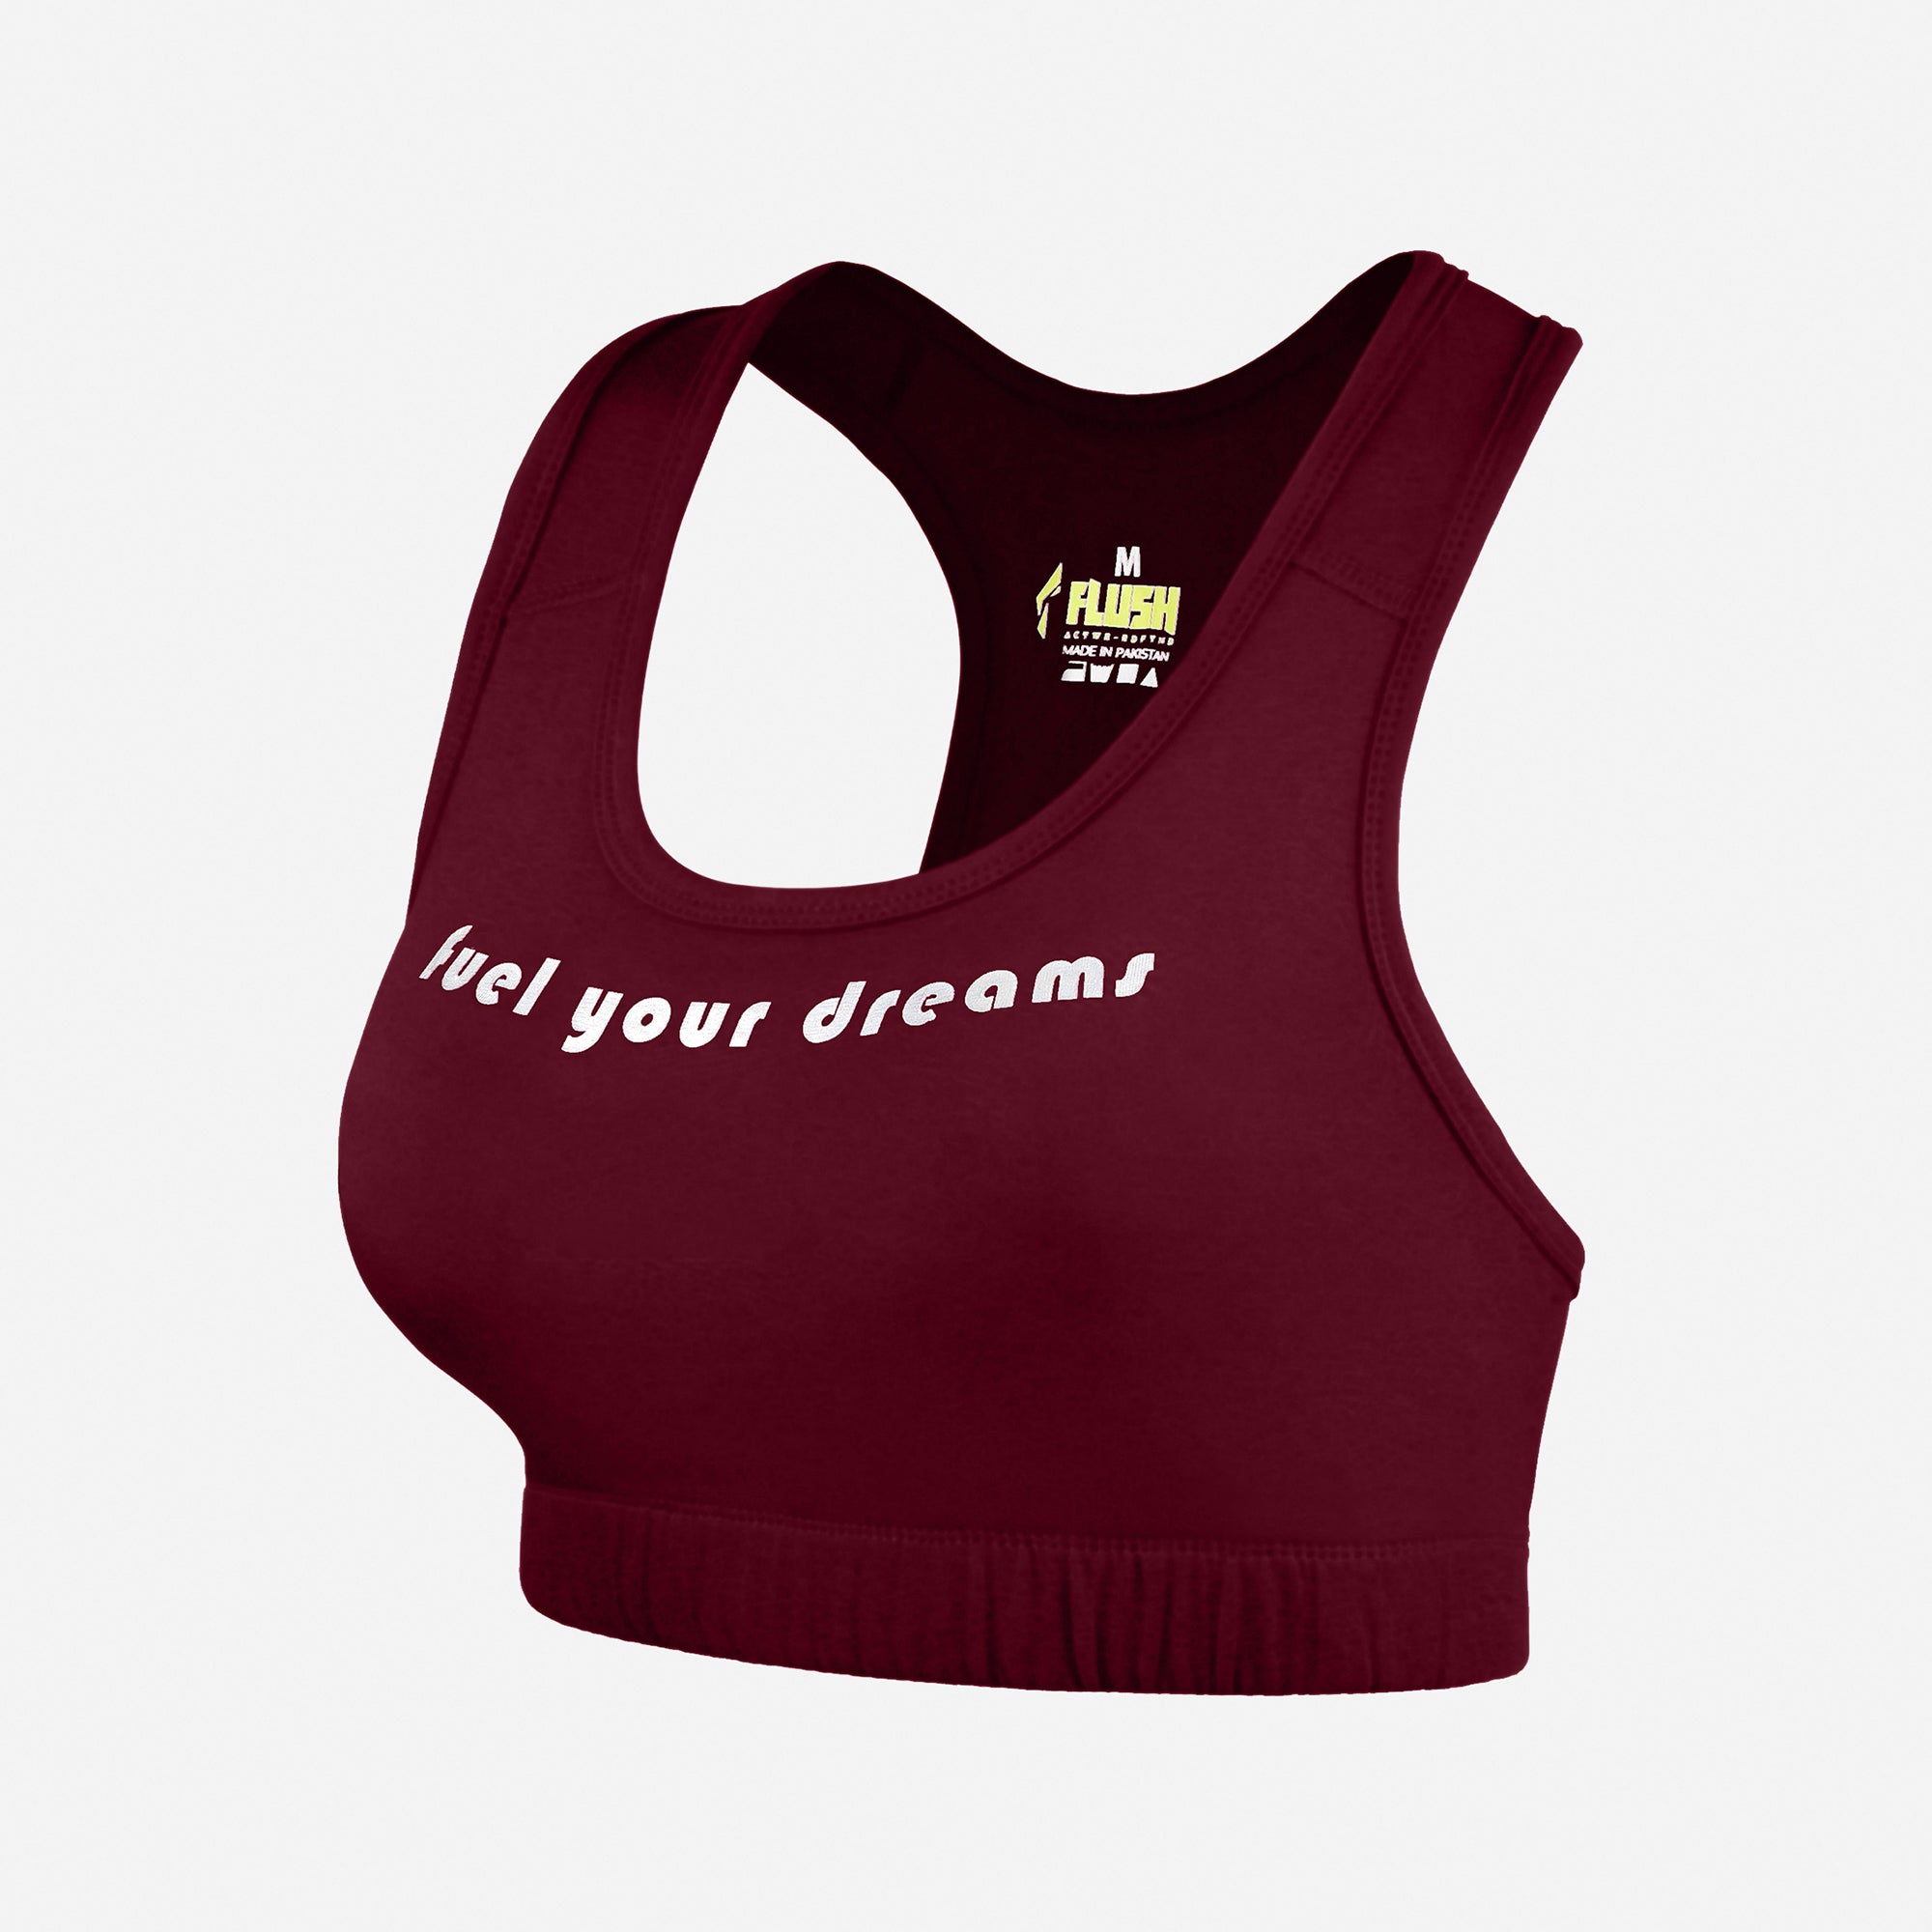 Women's Seamless Sports Bra, Support for Yoga Gym - Maroon